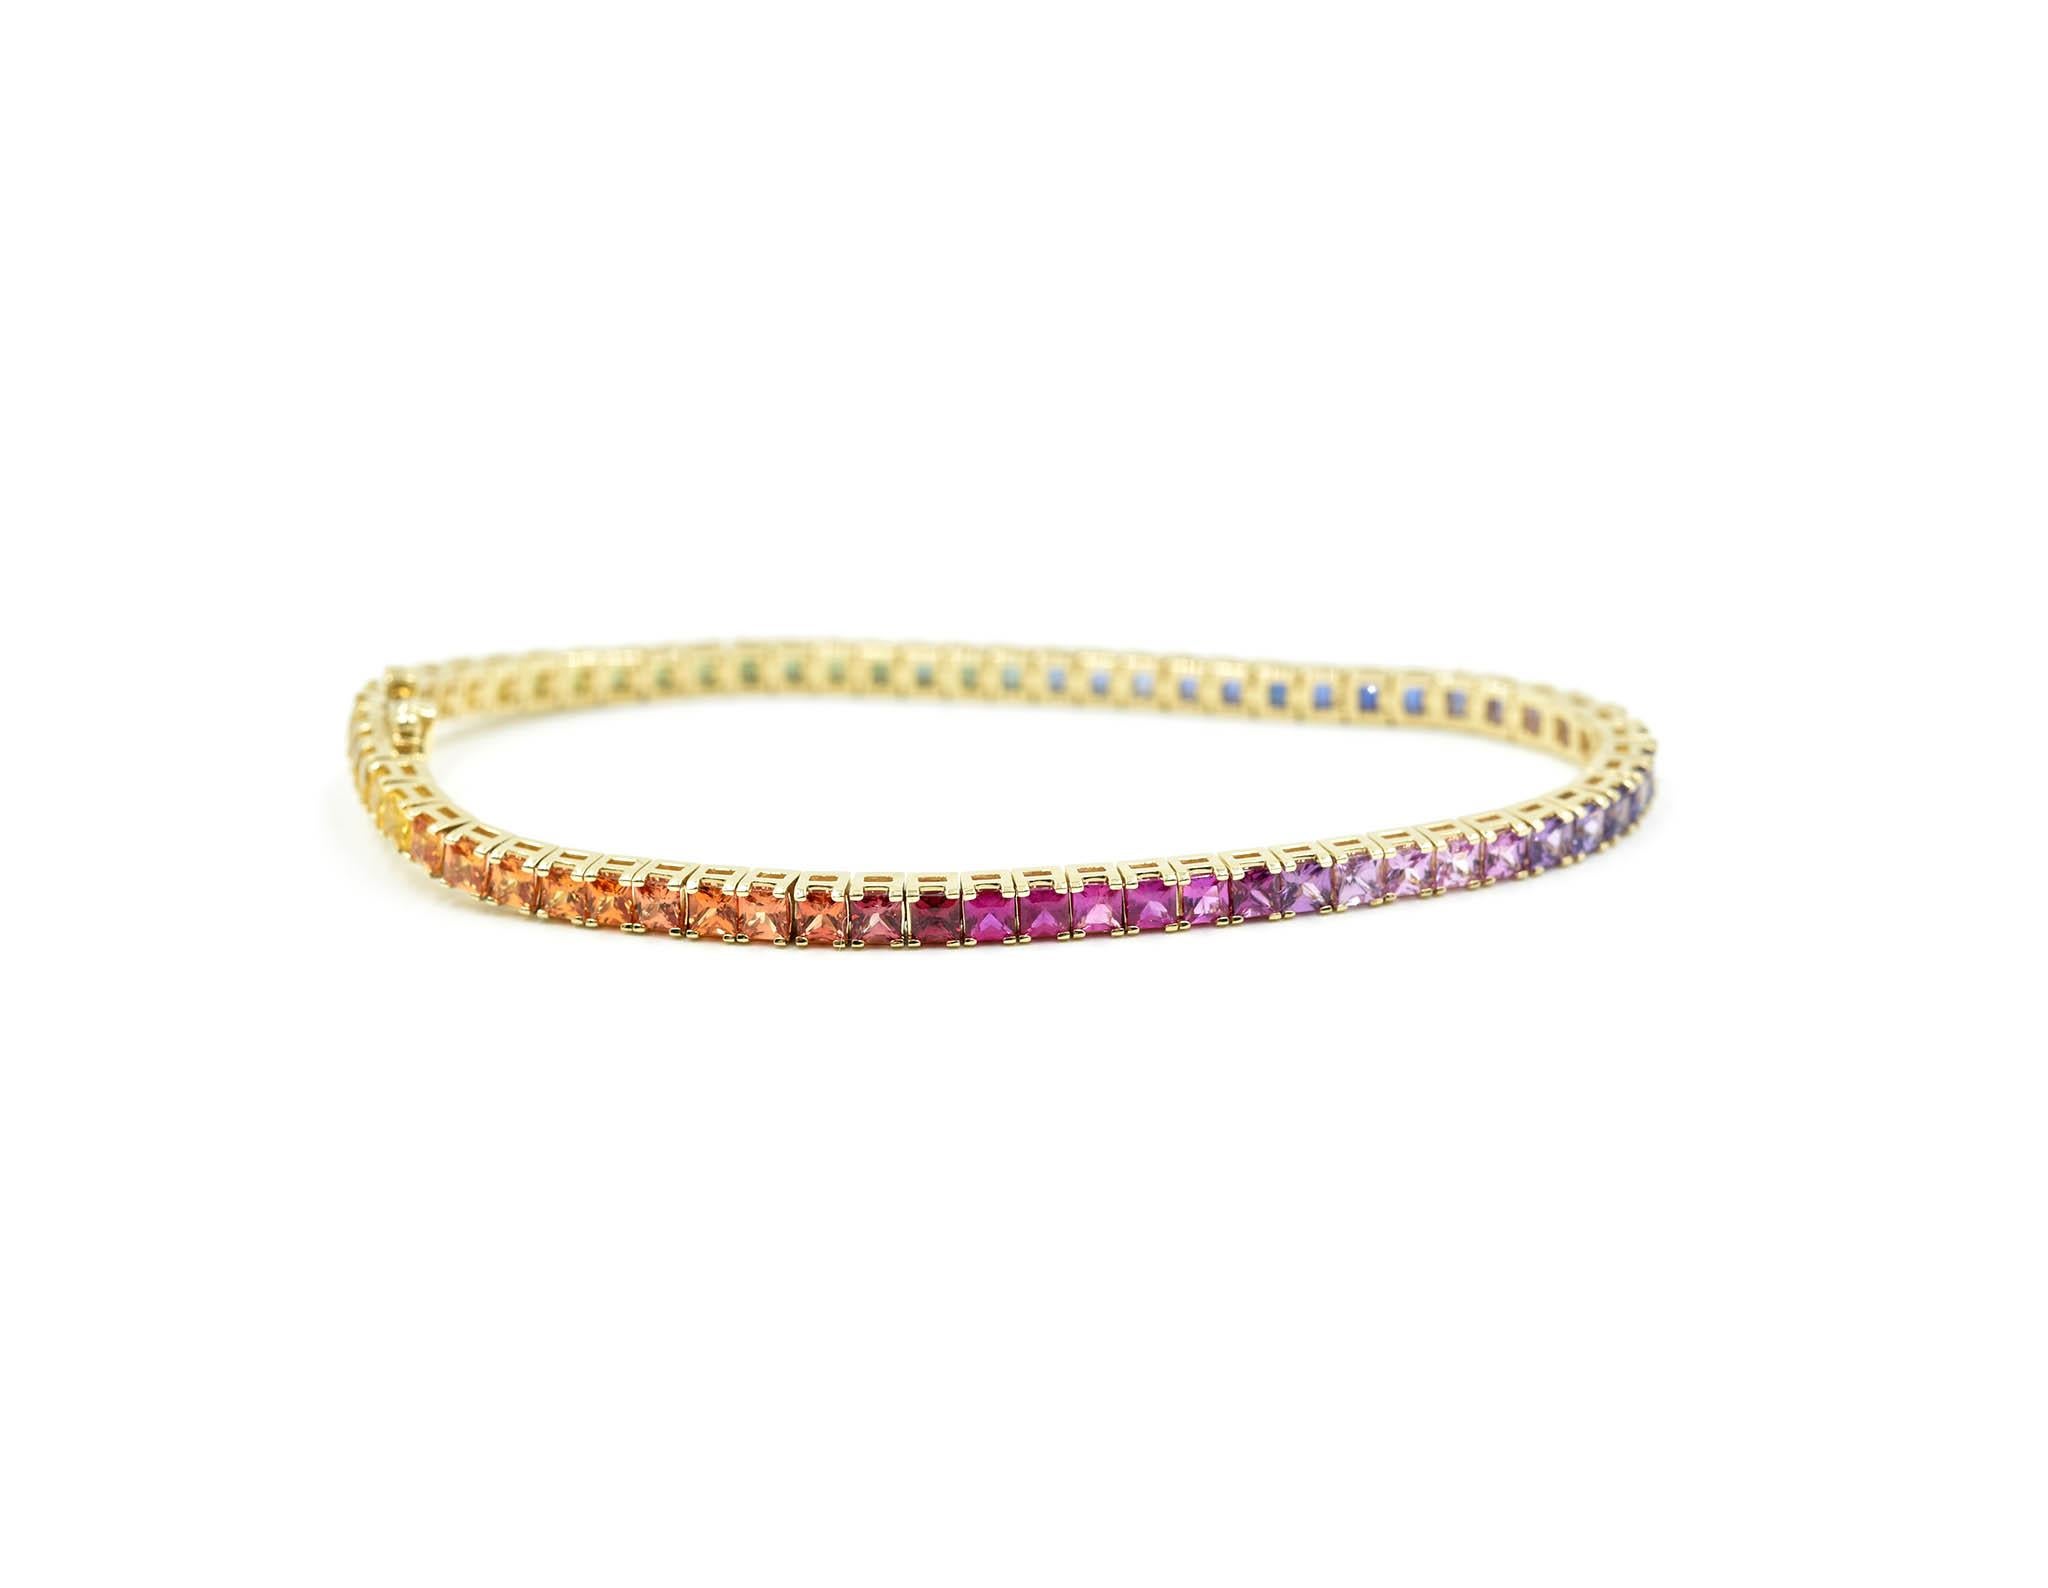 Designer: custom design
Material: 14k yellow gold
Sapphires: princess cut rainbow sapphires = 7.11 carat total weight
Dimensions: the bracelet measures 7-inch long and 1/8-inch wide
Weight: 11.84 grams
